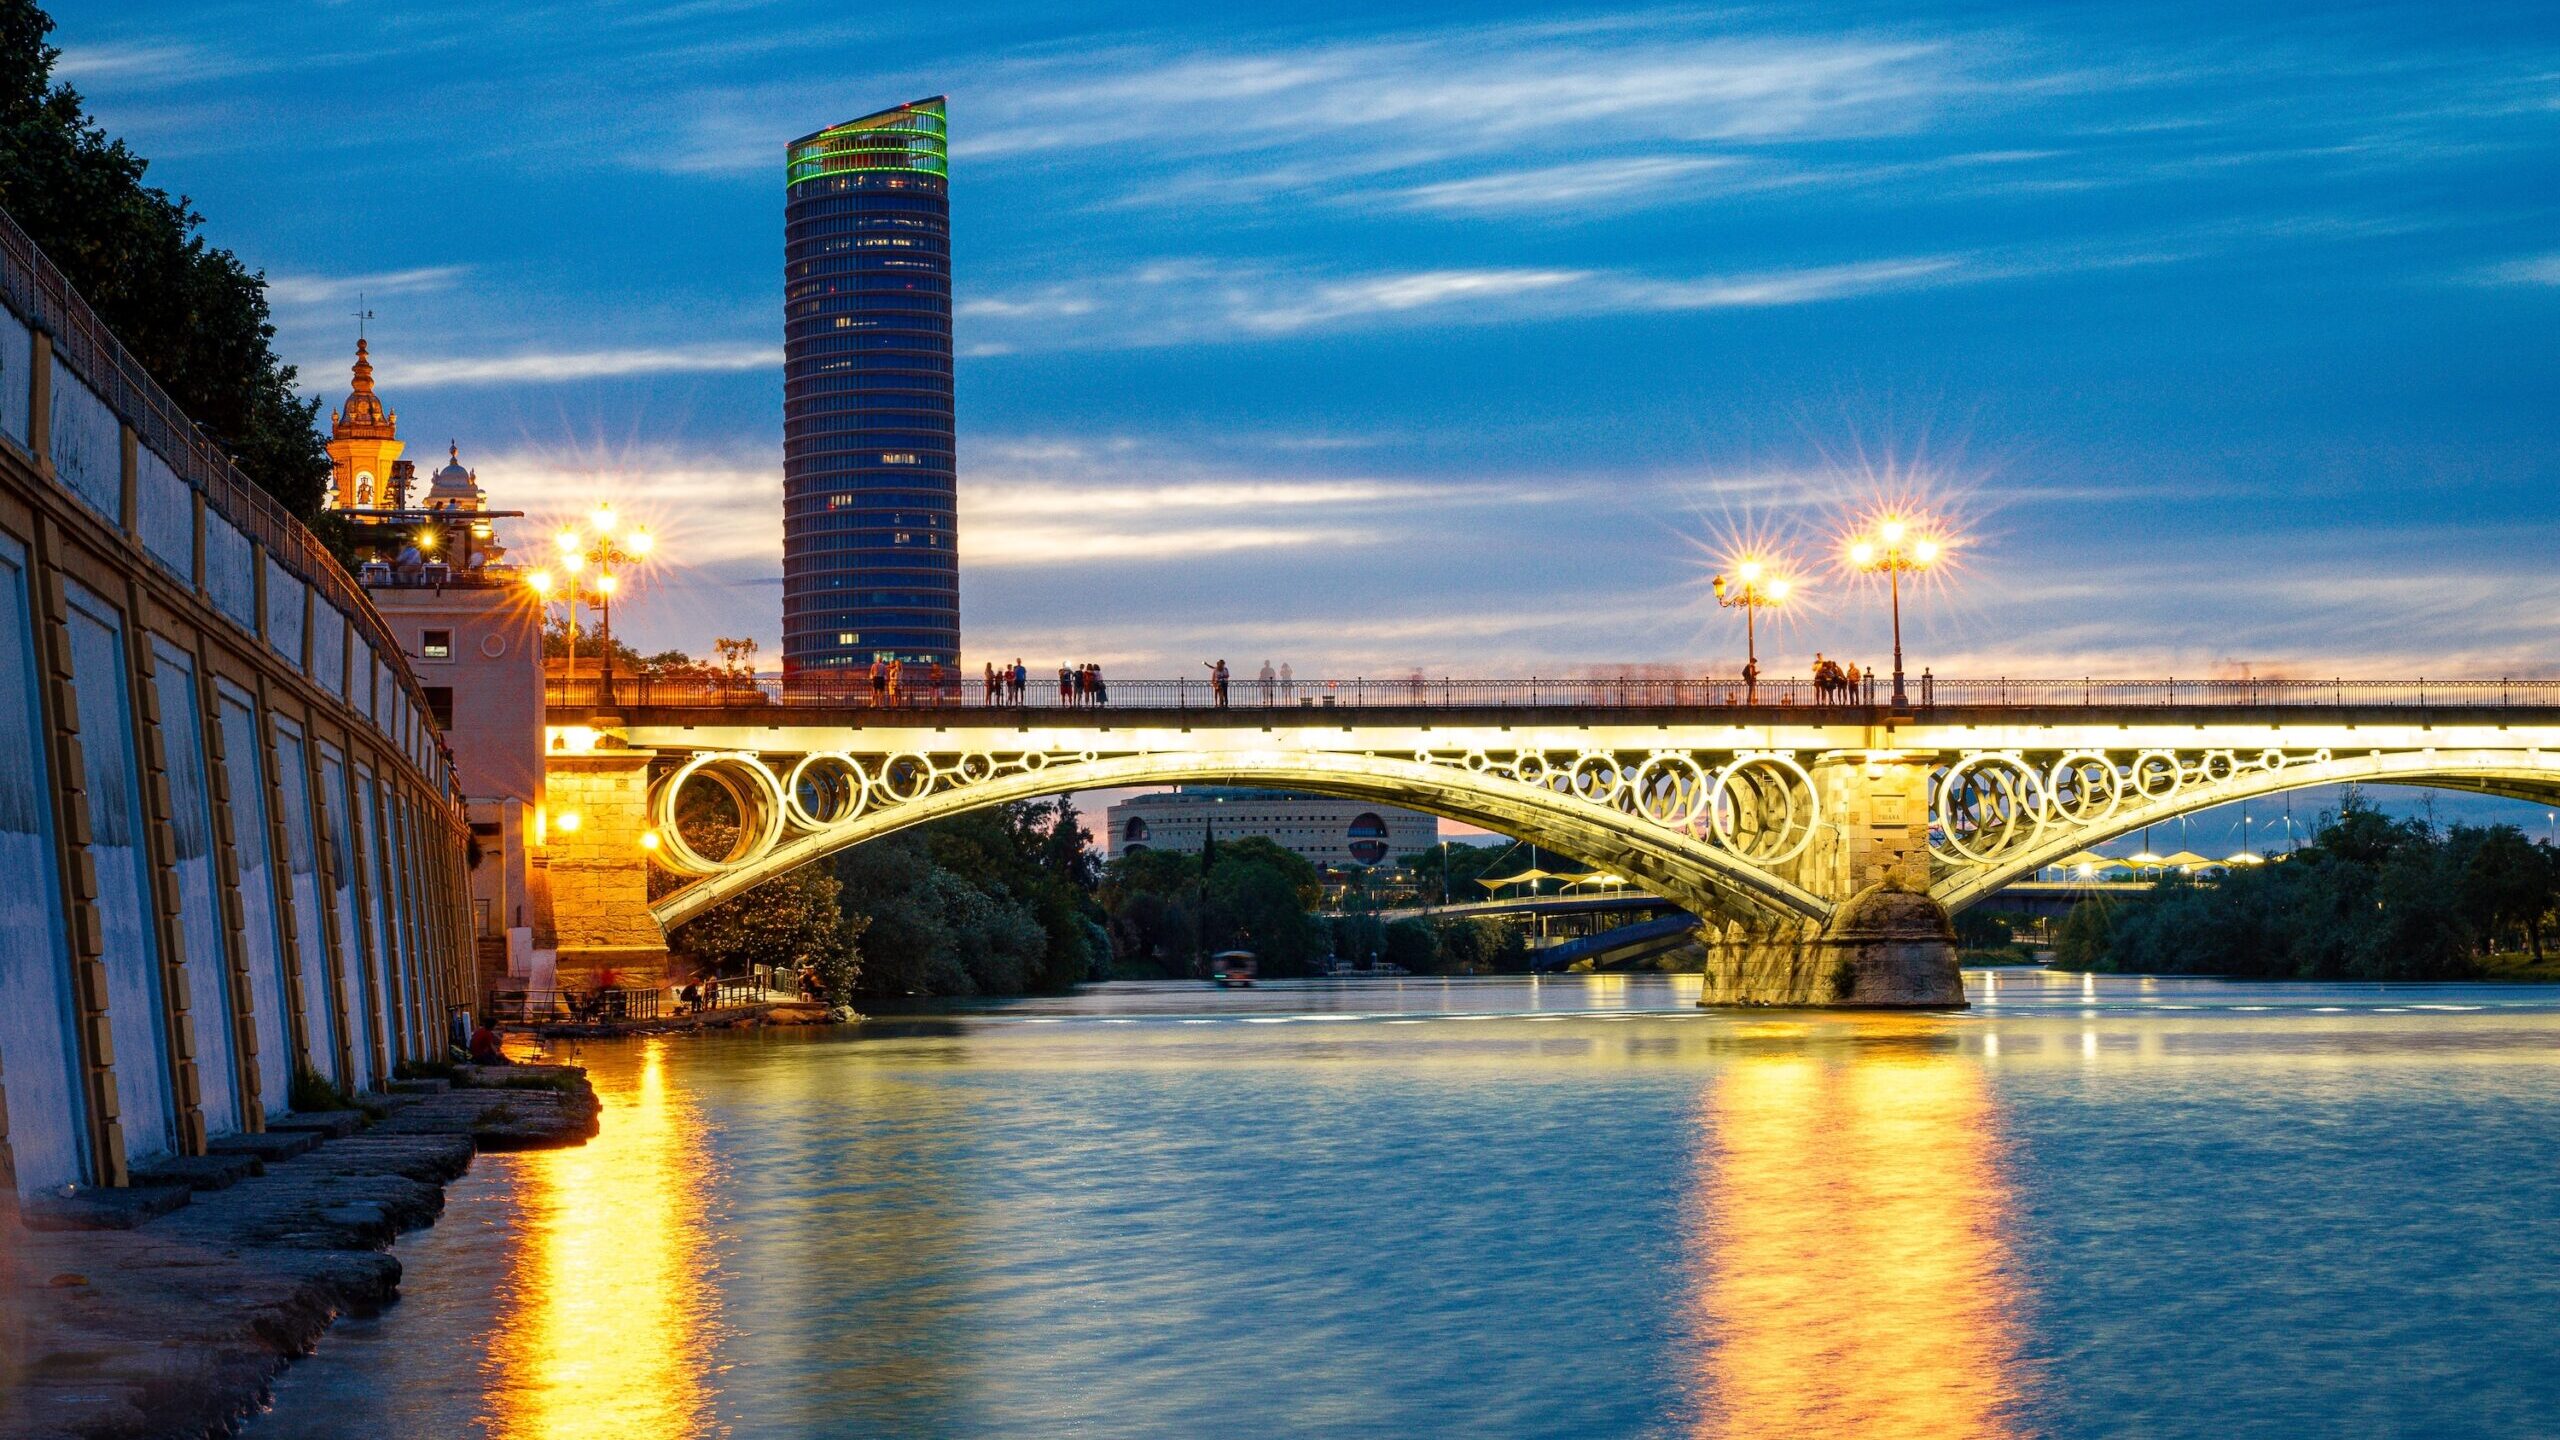 Seville: long history coupled with technology innovation